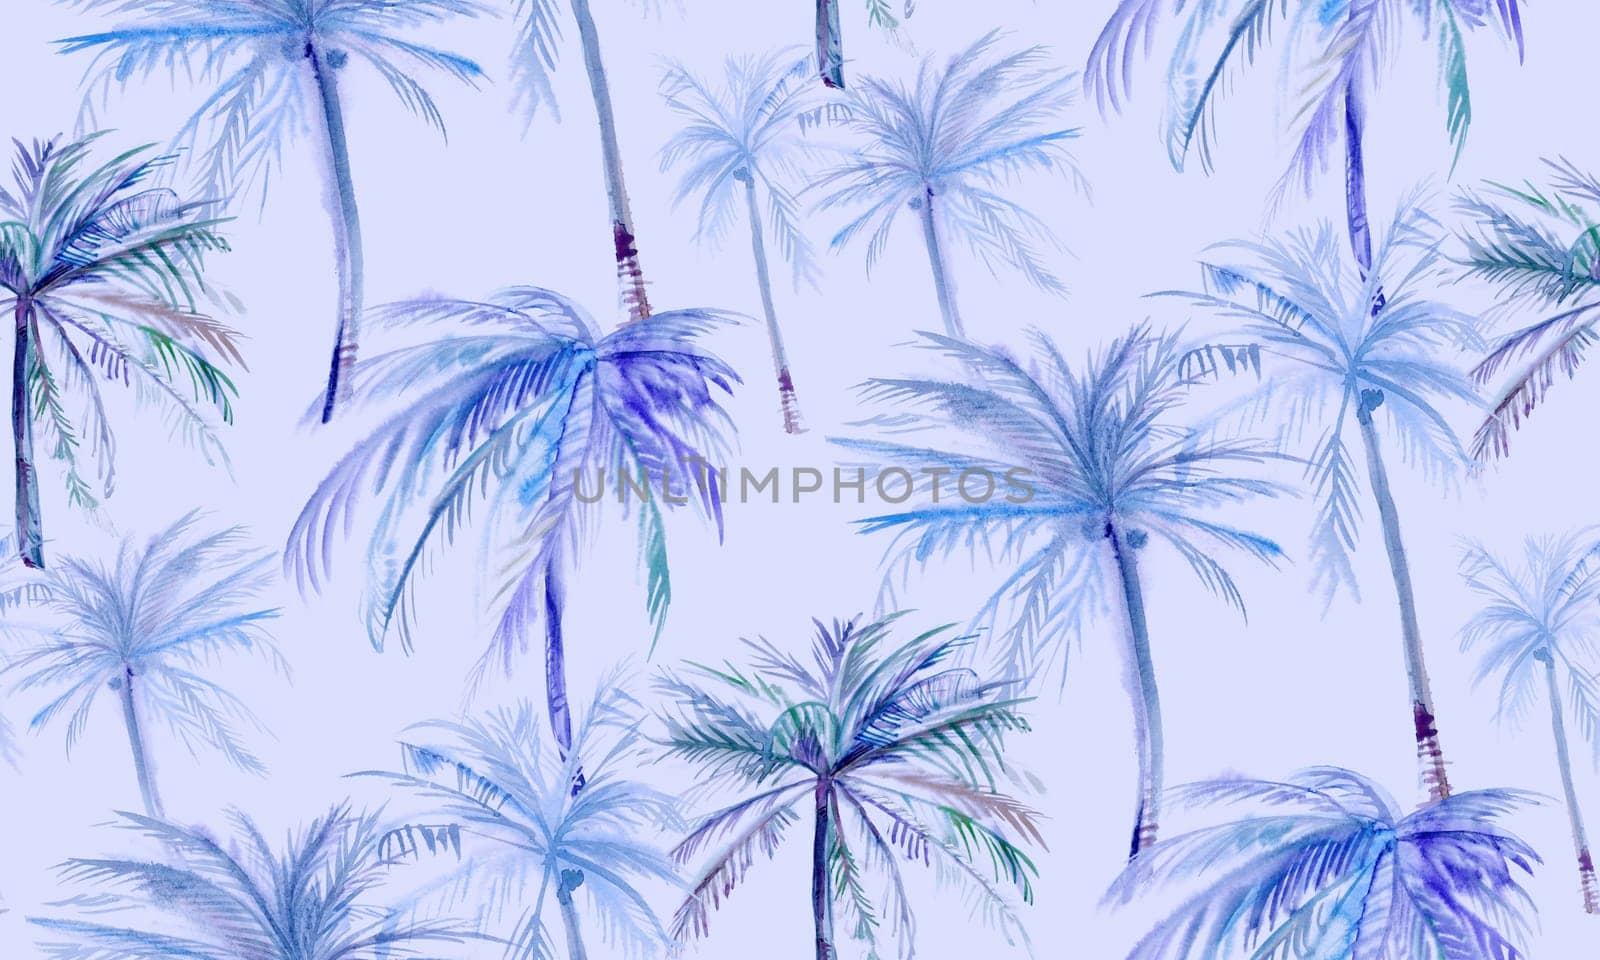 Subdued tropics on a lilac pattern with coconut trees painted in watercolor by MarinaVoyush